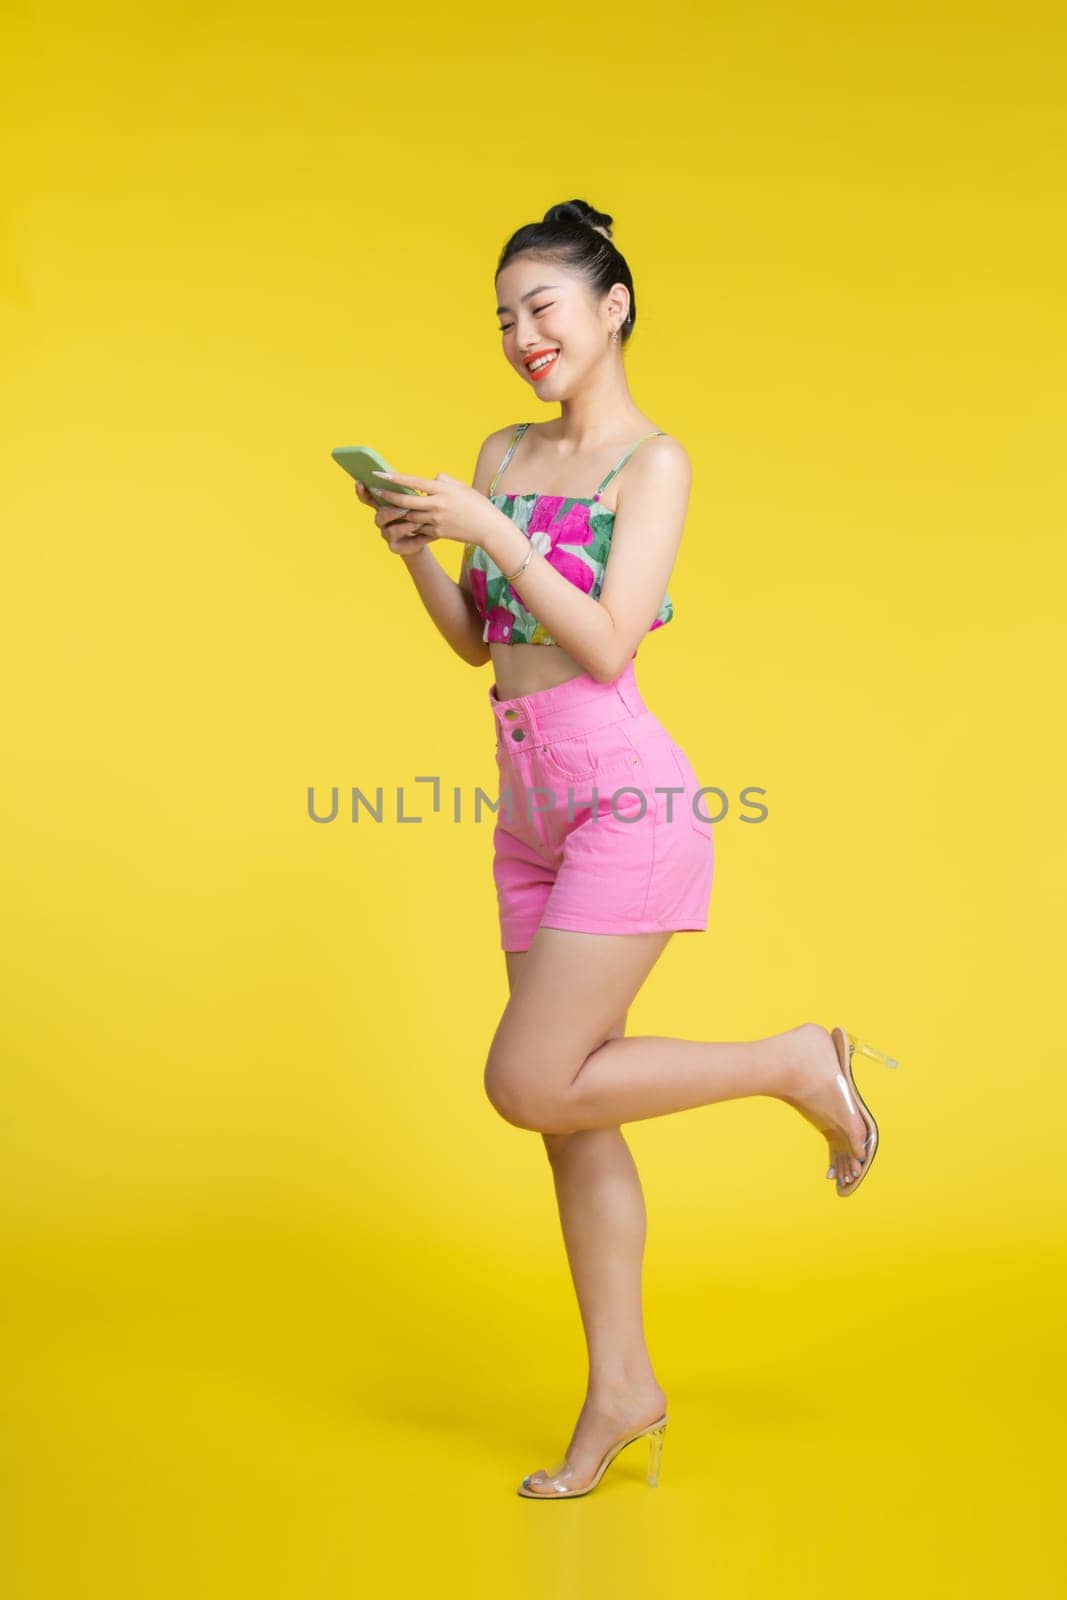 Beautiful Asian woman holding smartphone and smiling on light yellow background